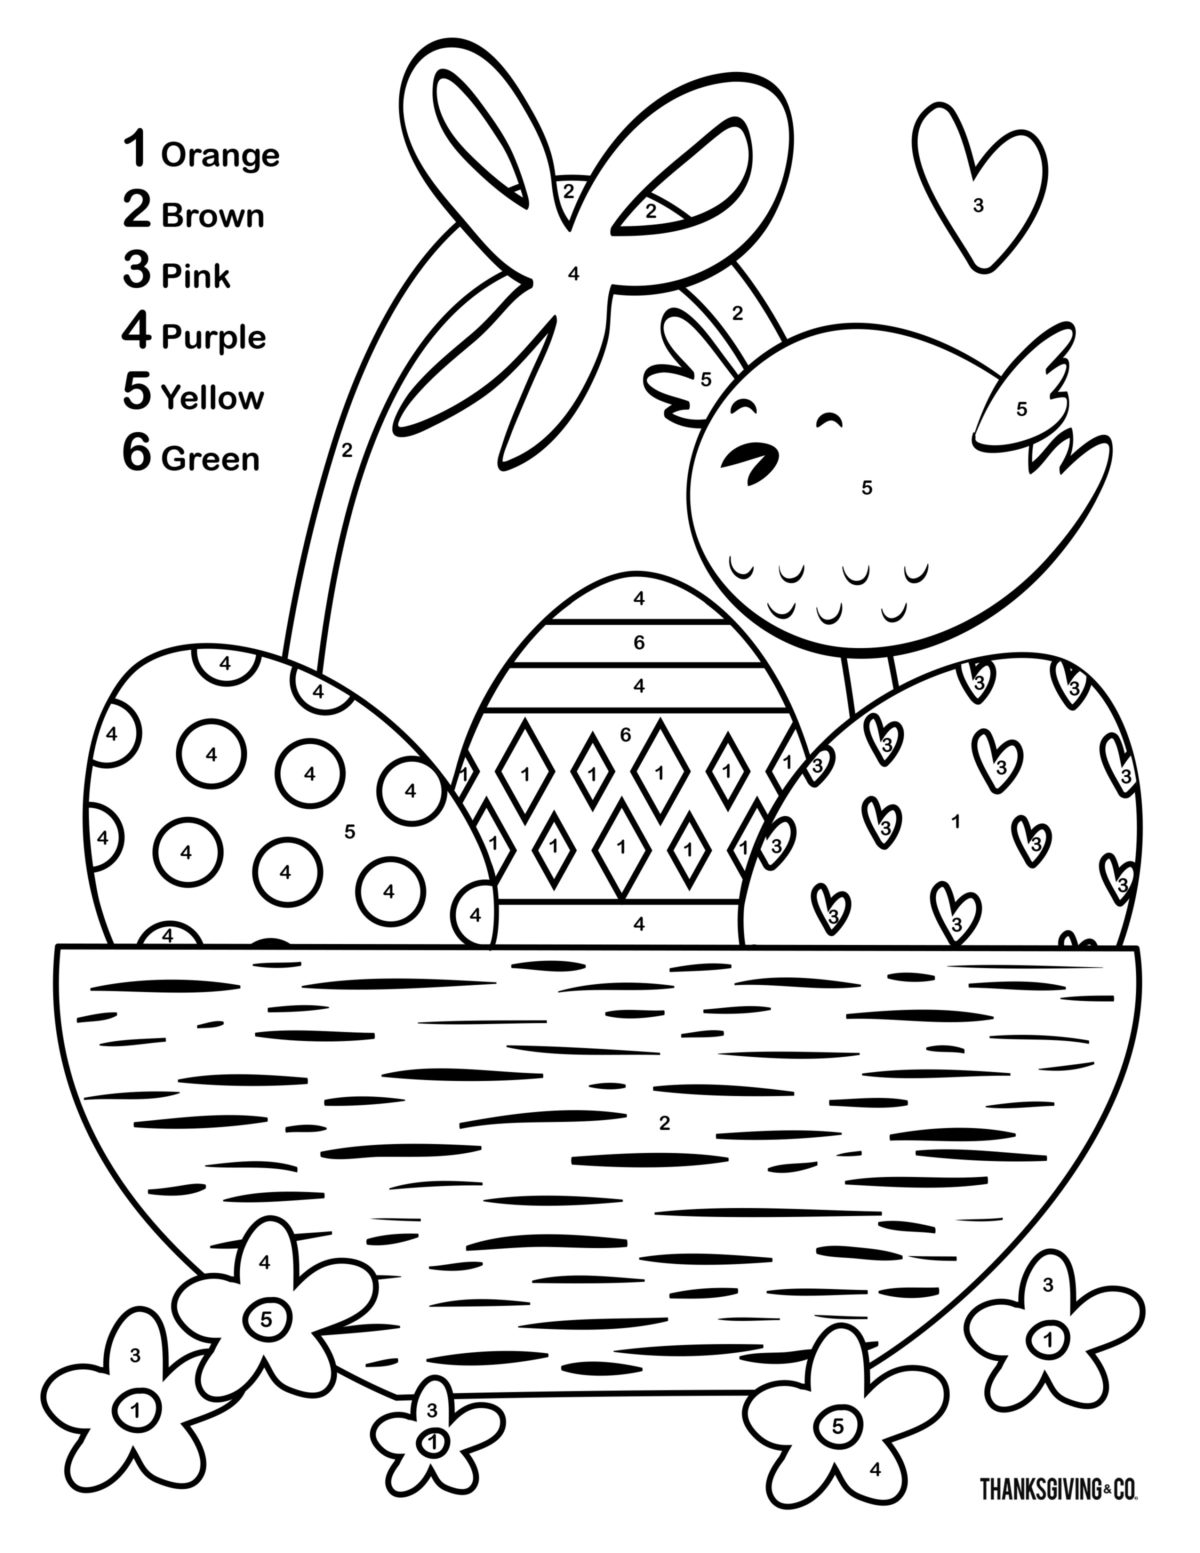 3 color by number Easter printables to keep your kids entertained